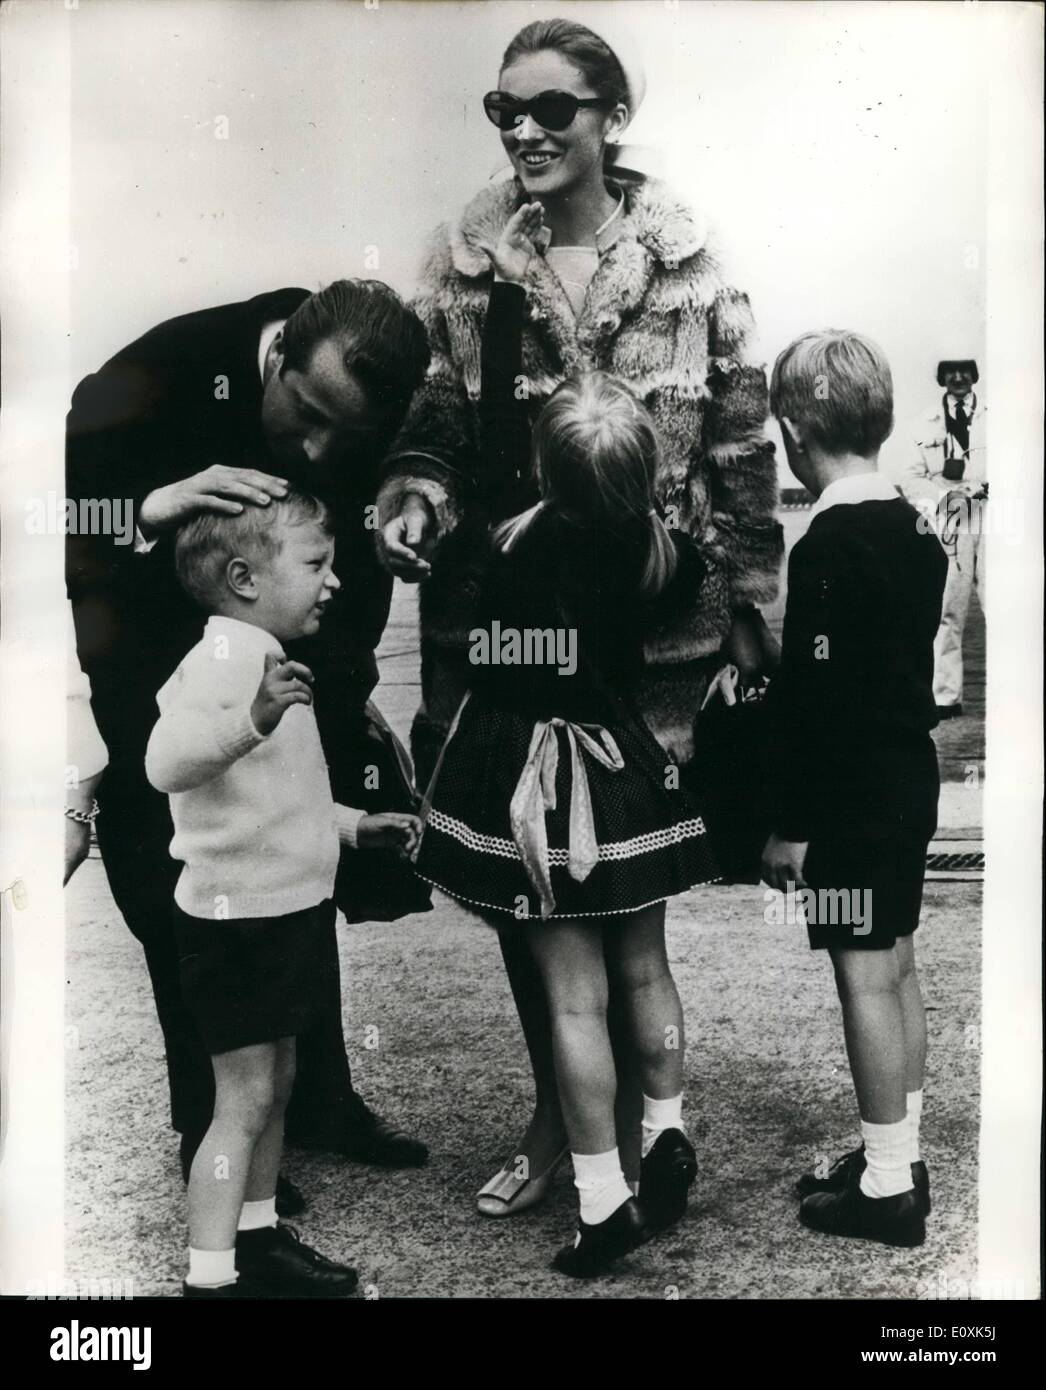 May 05, 1967 - Prince Albert and Princess Paola Return from Canada. Princess Albert and Princess Paola of Liege, arrived at Brussels arrived back at Brussels Airport on Tuesday after visiting Expo 67 in Montreal Canada. They were greeted at their airport by their children. Photo shows Prince Albert and Princess Paola are greeted by their children, Prince Laurent Princess Astrid and Prince Philippe, at Brussels Airport. Stock Photo